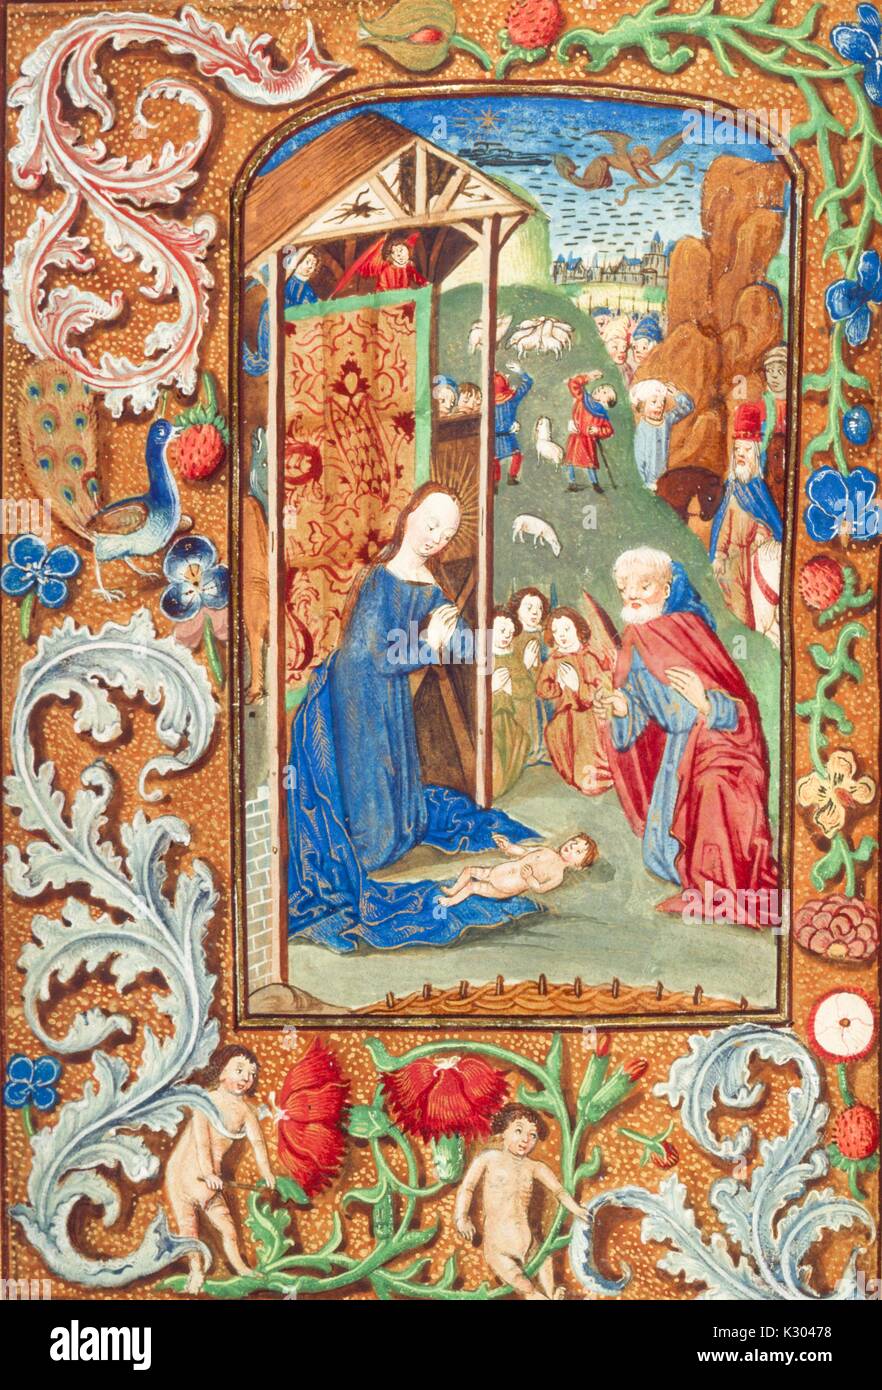 Illuminated manuscript page depicting Mary, Joseph, and the baby Jesus as well as angels and townspeople, from a 15th century Dutch book of hours, 1495. Stock Photo